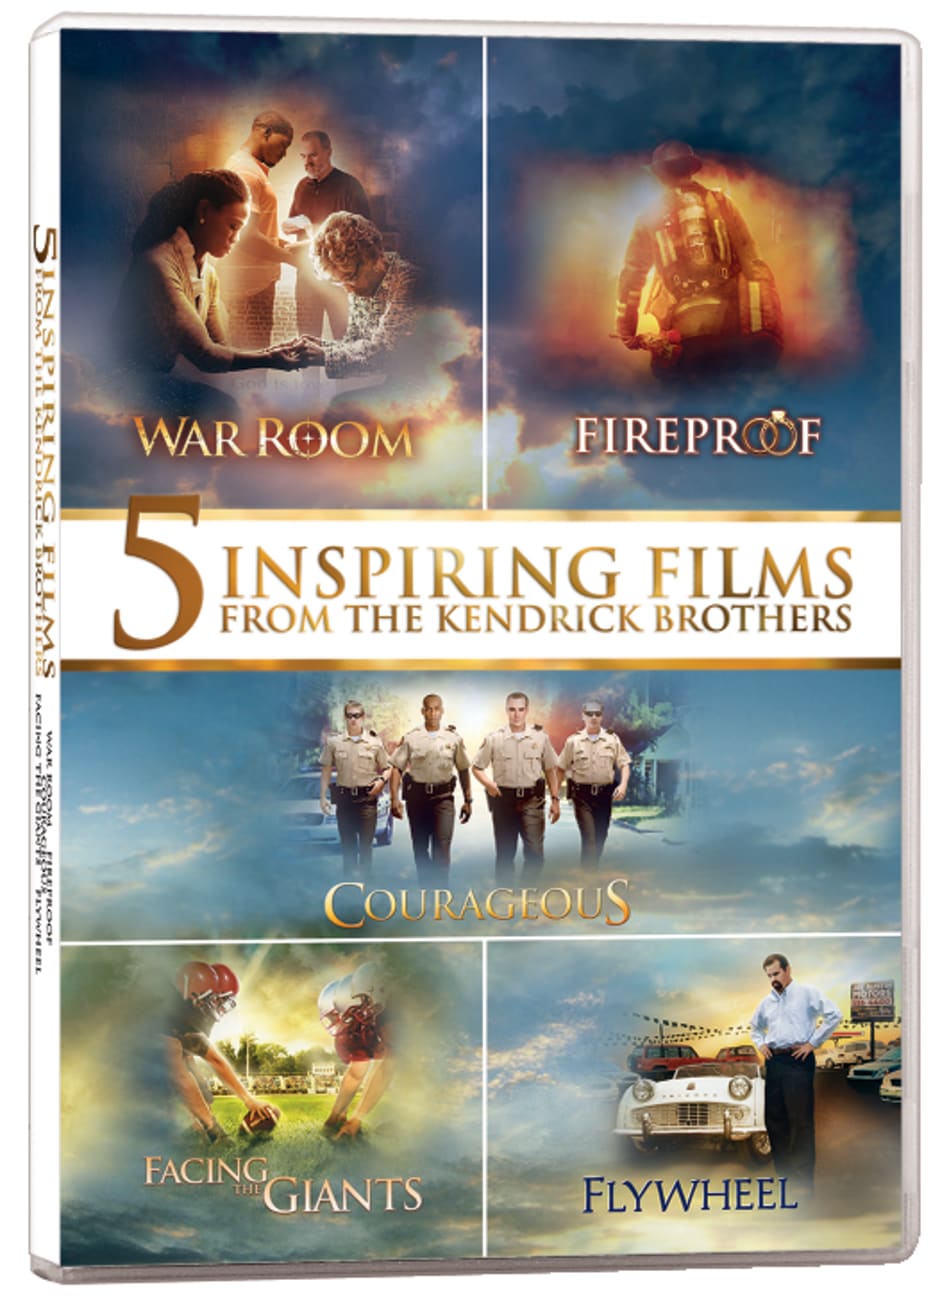 5 Inspiring Films From the Kendrick Brothers Pack (5 Dvd Kendrick Brothers Pack) DVD